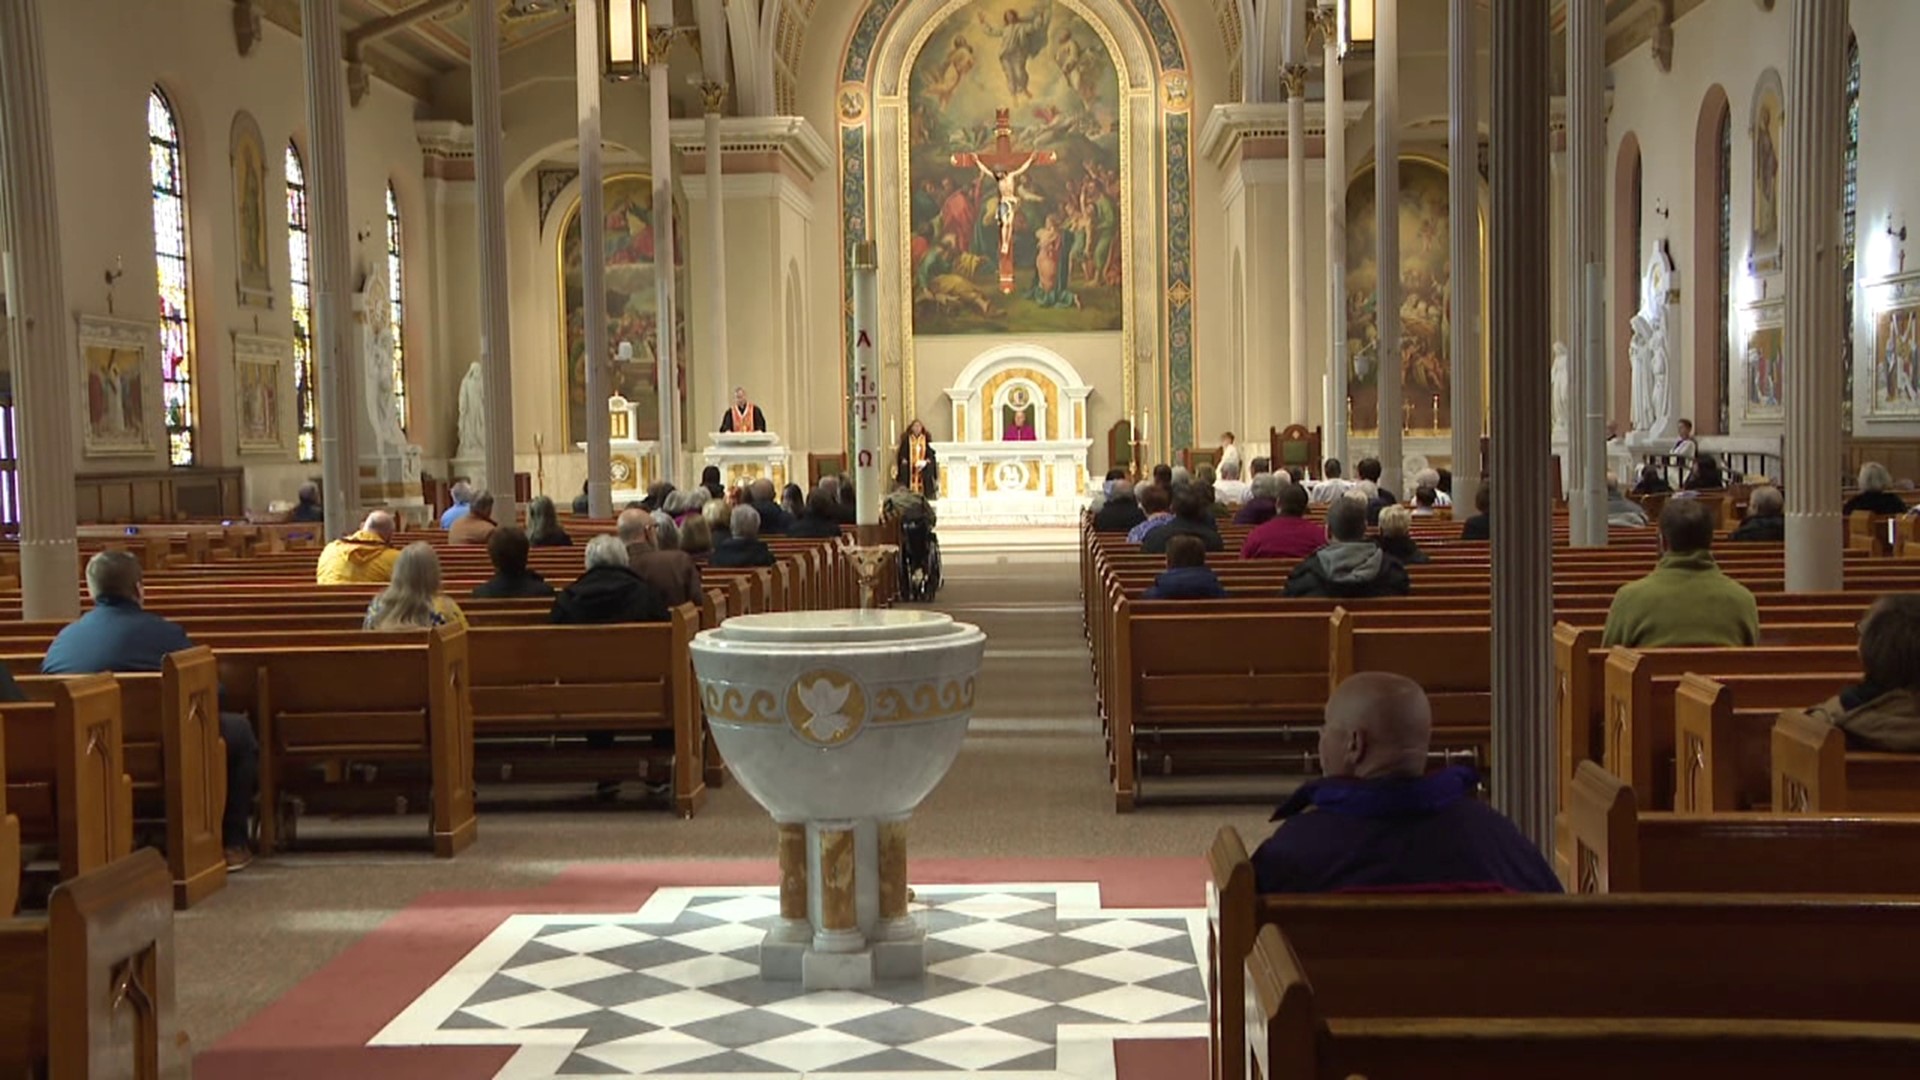 The mass held at St. Peter's Cathedral in Scranton marked two years since Russia invaded Ukraine.